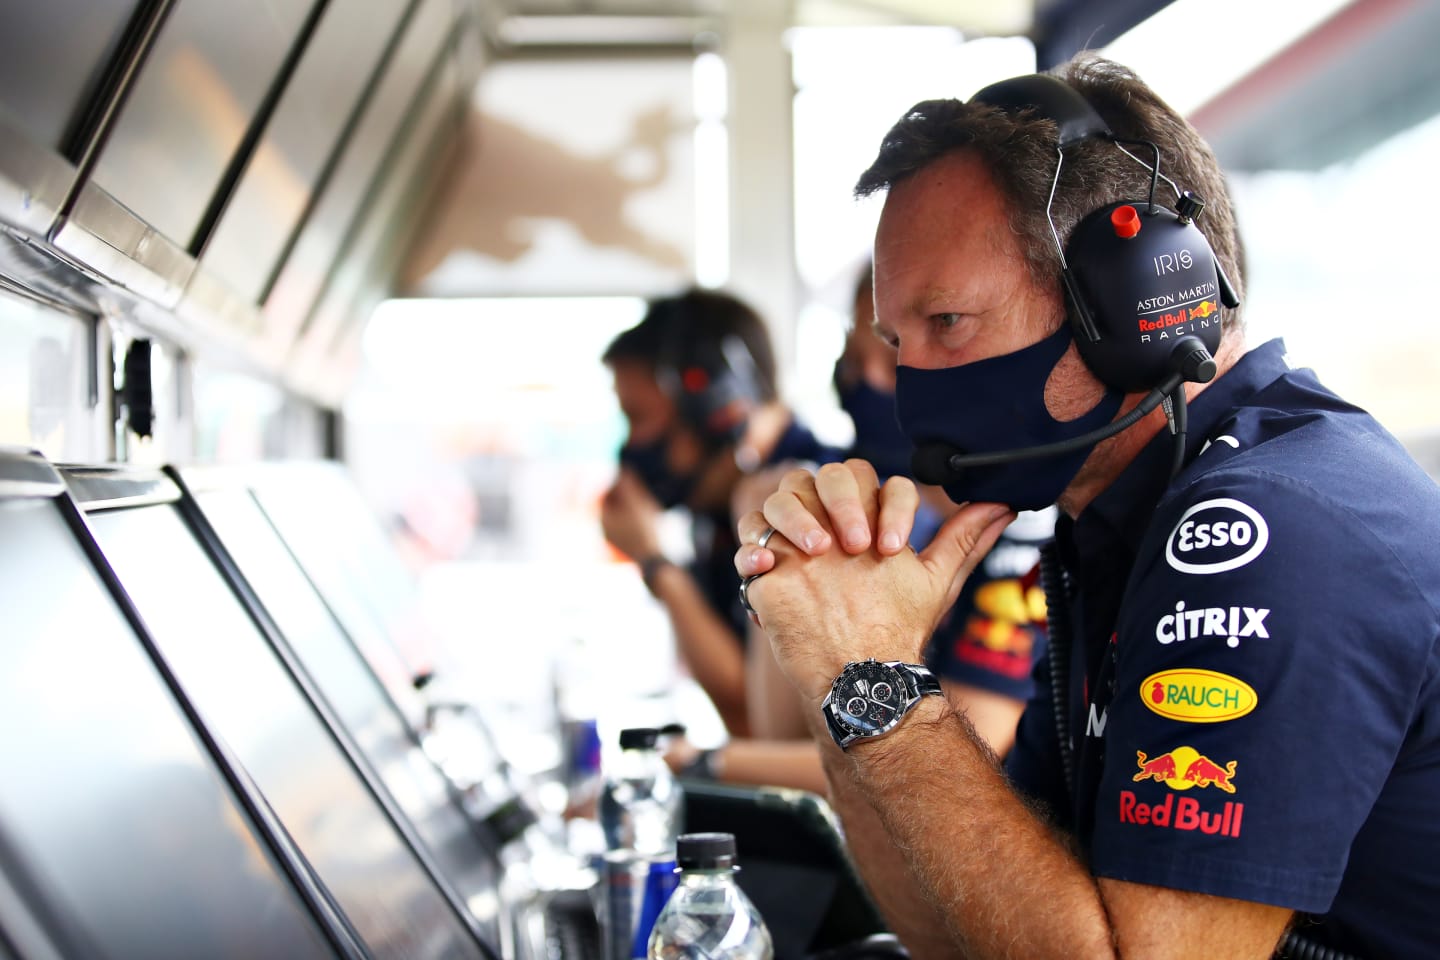 NORTHAMPTON, ENGLAND - AUGUST 07: Red Bull Racing Team Principal Christian Horner looks on from the